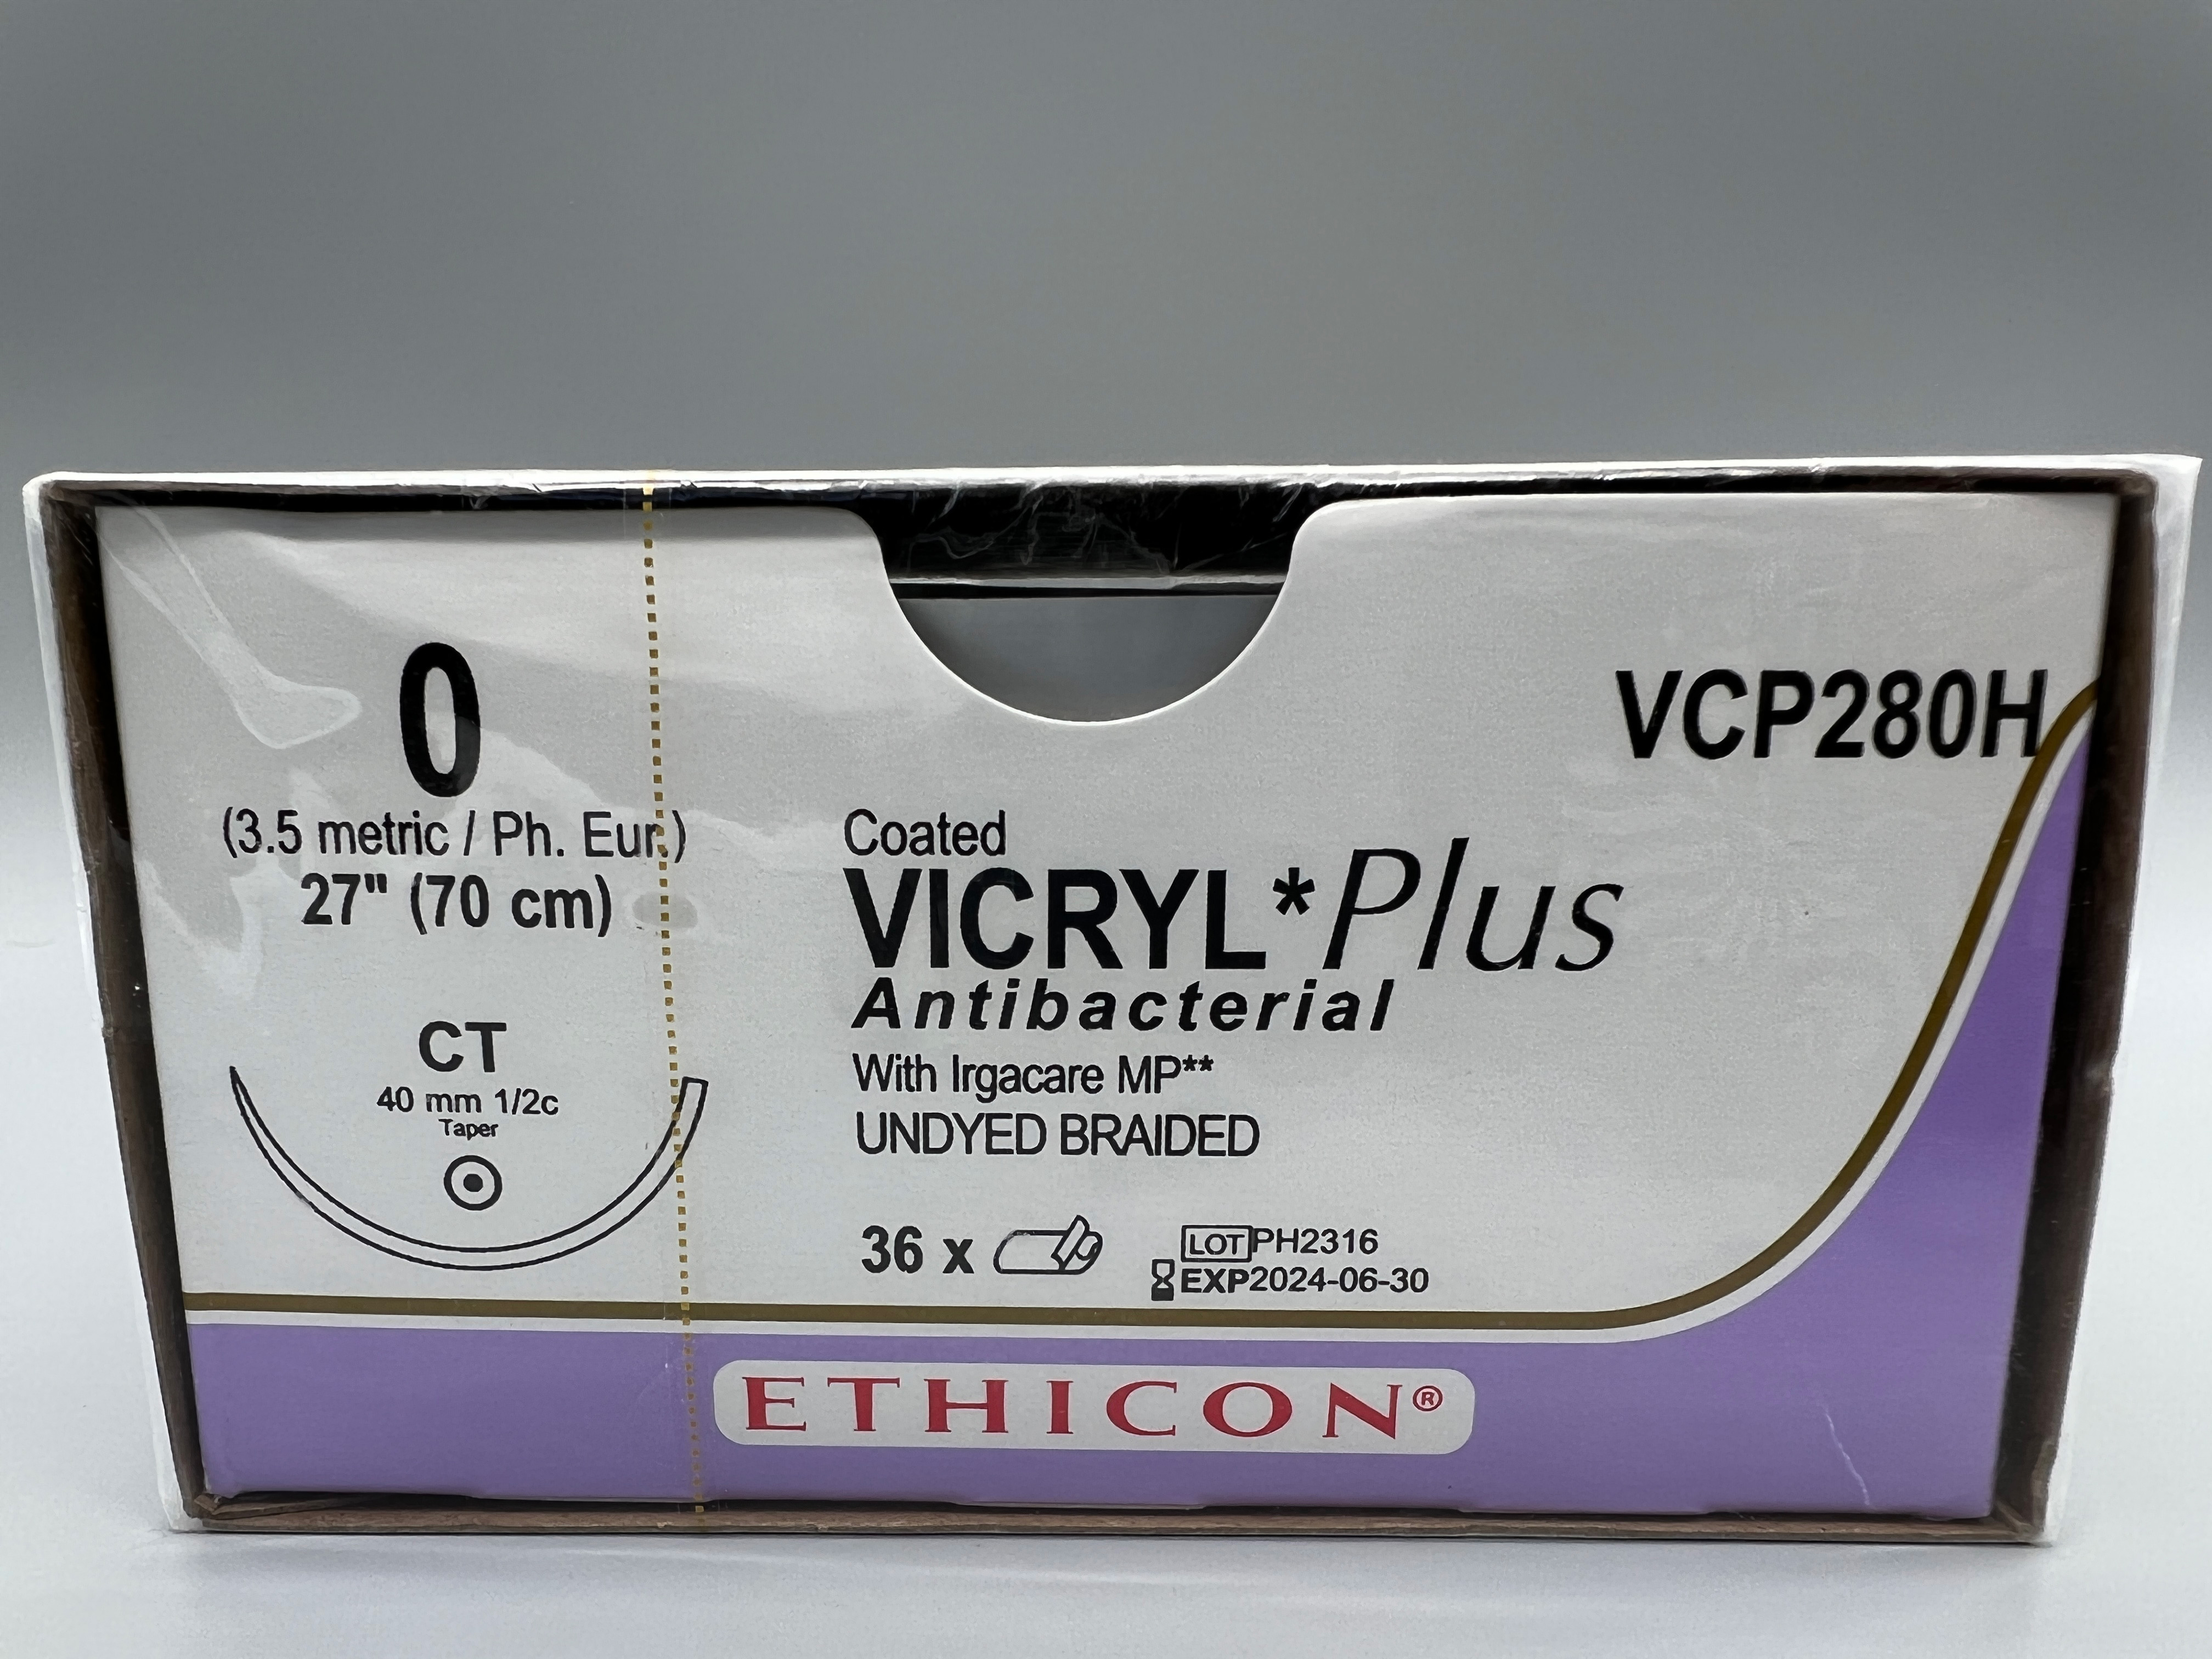 COATED VICRYL PLUS ANTIBACTERIAL UNDYED BRAIDED, CT 40MM 1/2C TAPER